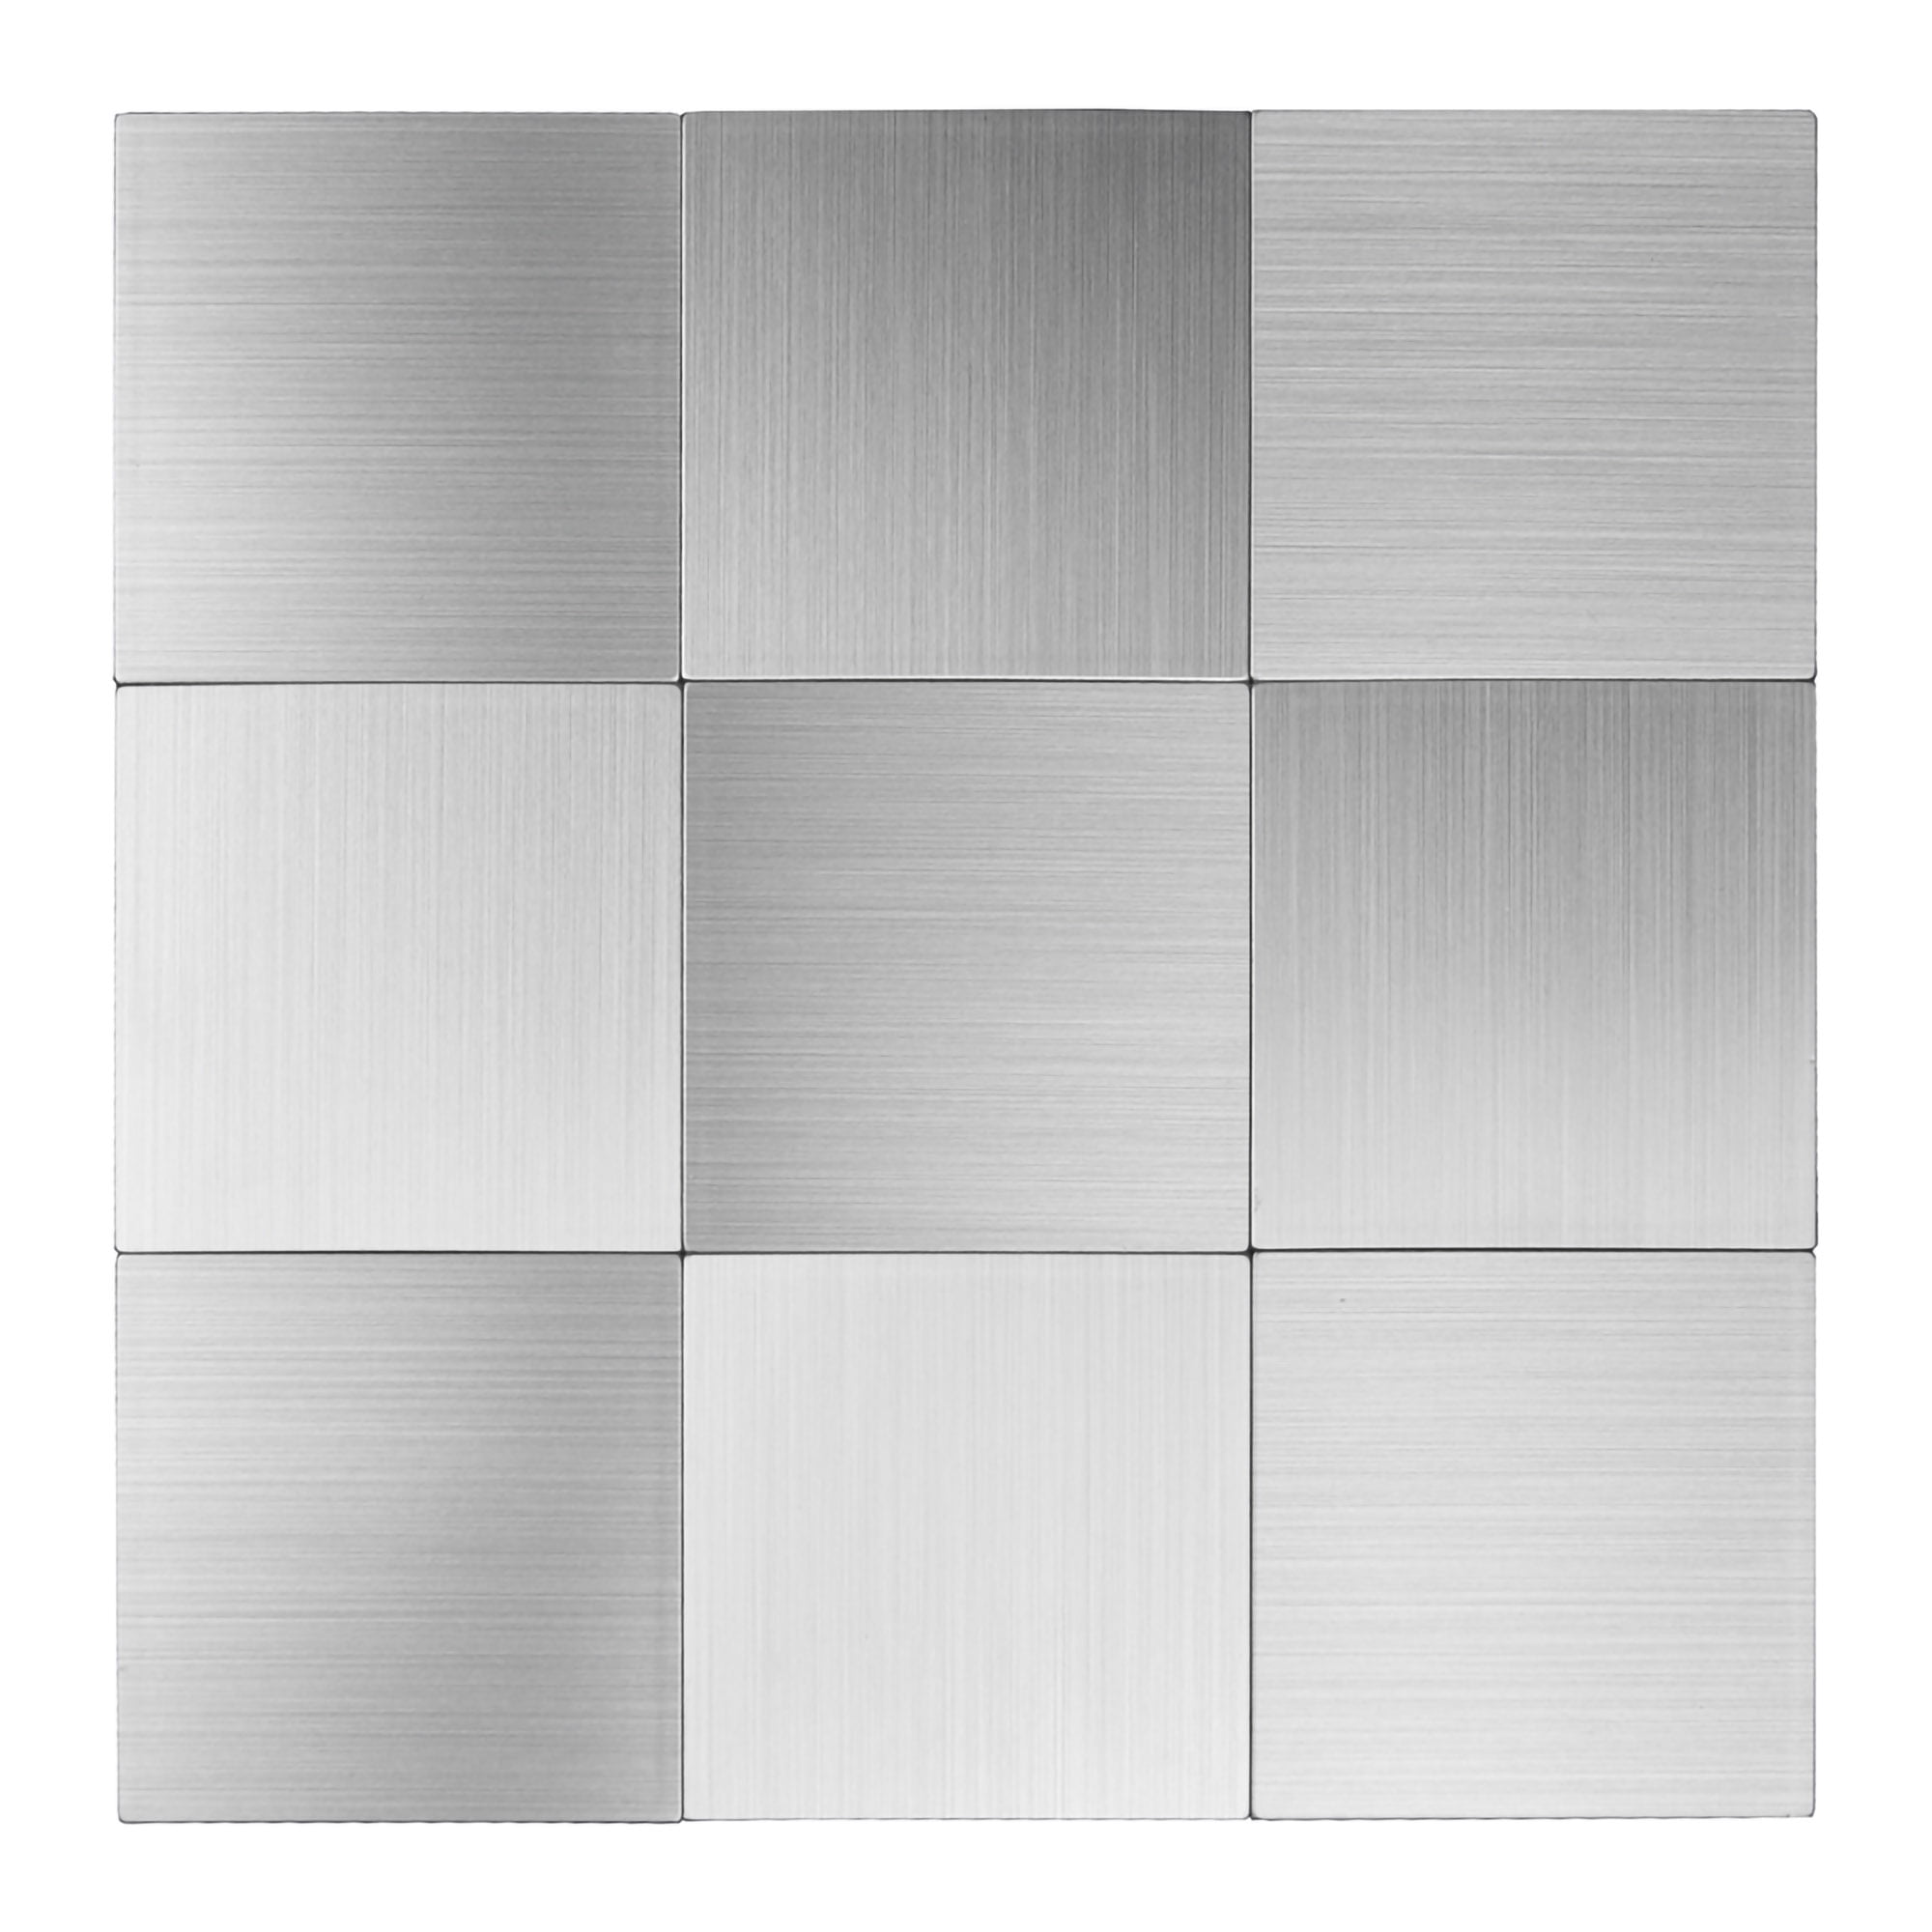 Art3d Squre 12 in. x 12 in.Peel and Stick Brushed Stainless Steel Backsplash Tile (10-Pack)